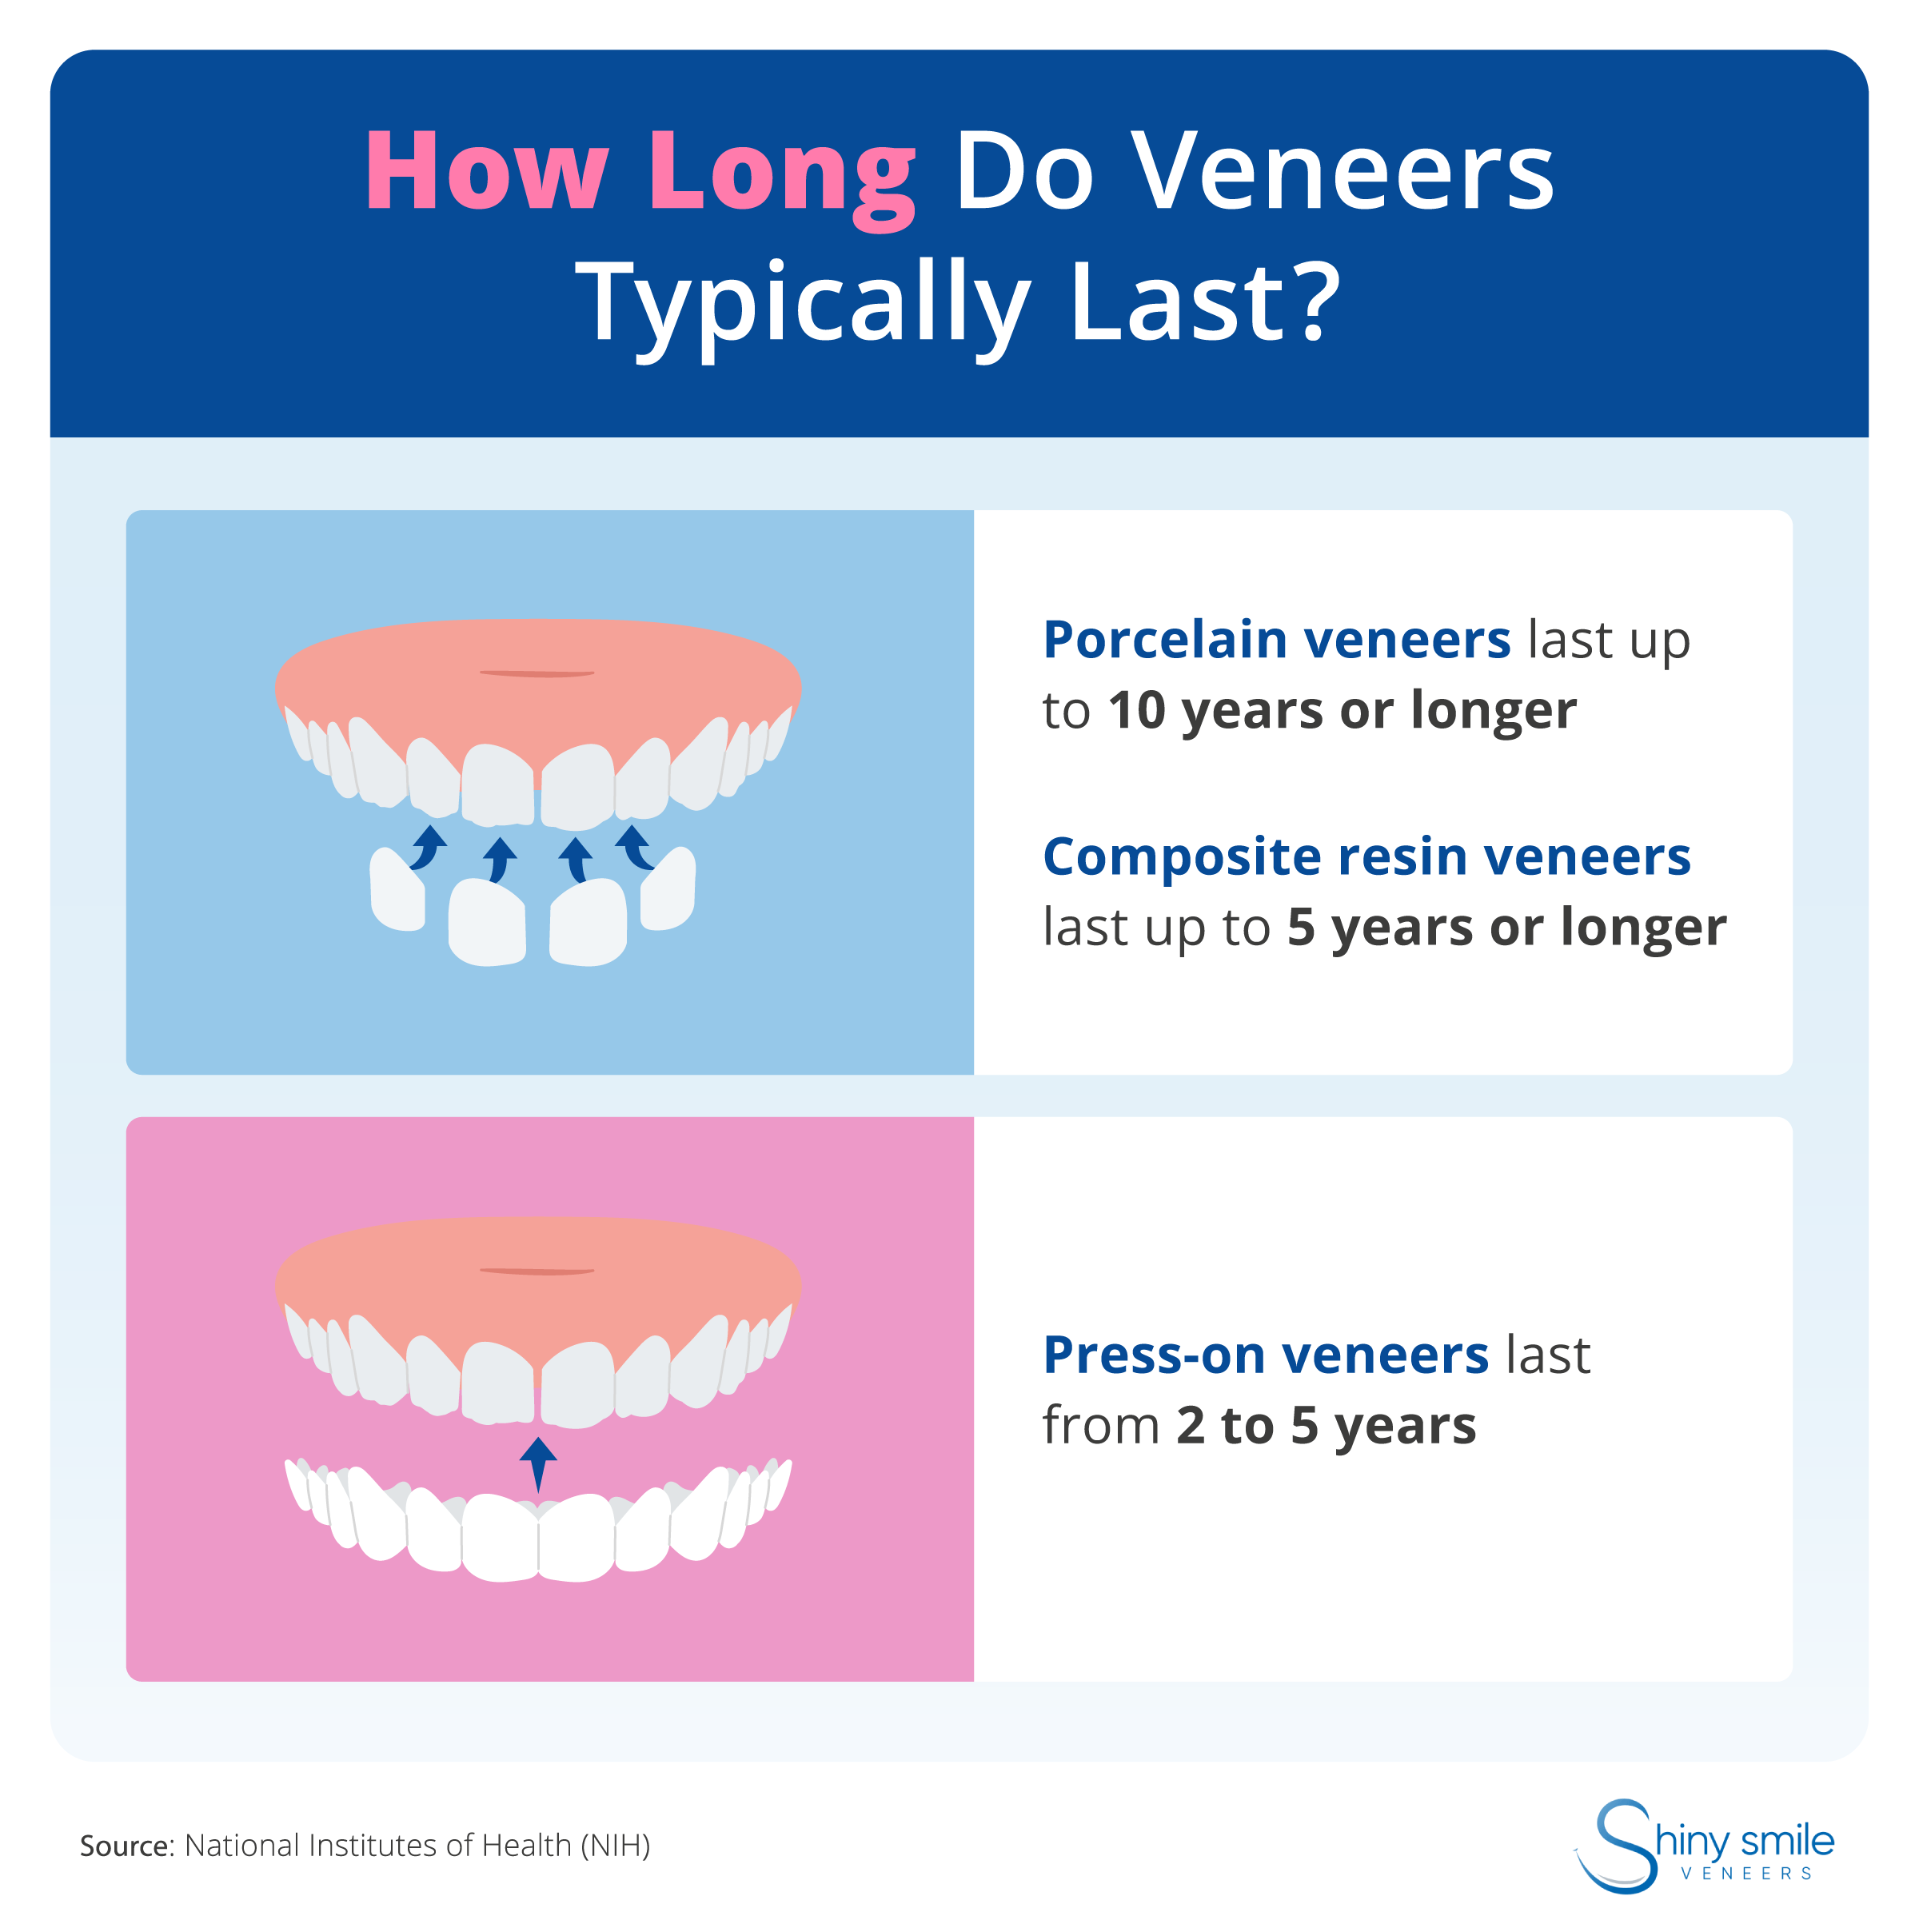 A guide to how long porcelain, composite, and press-on veneers last